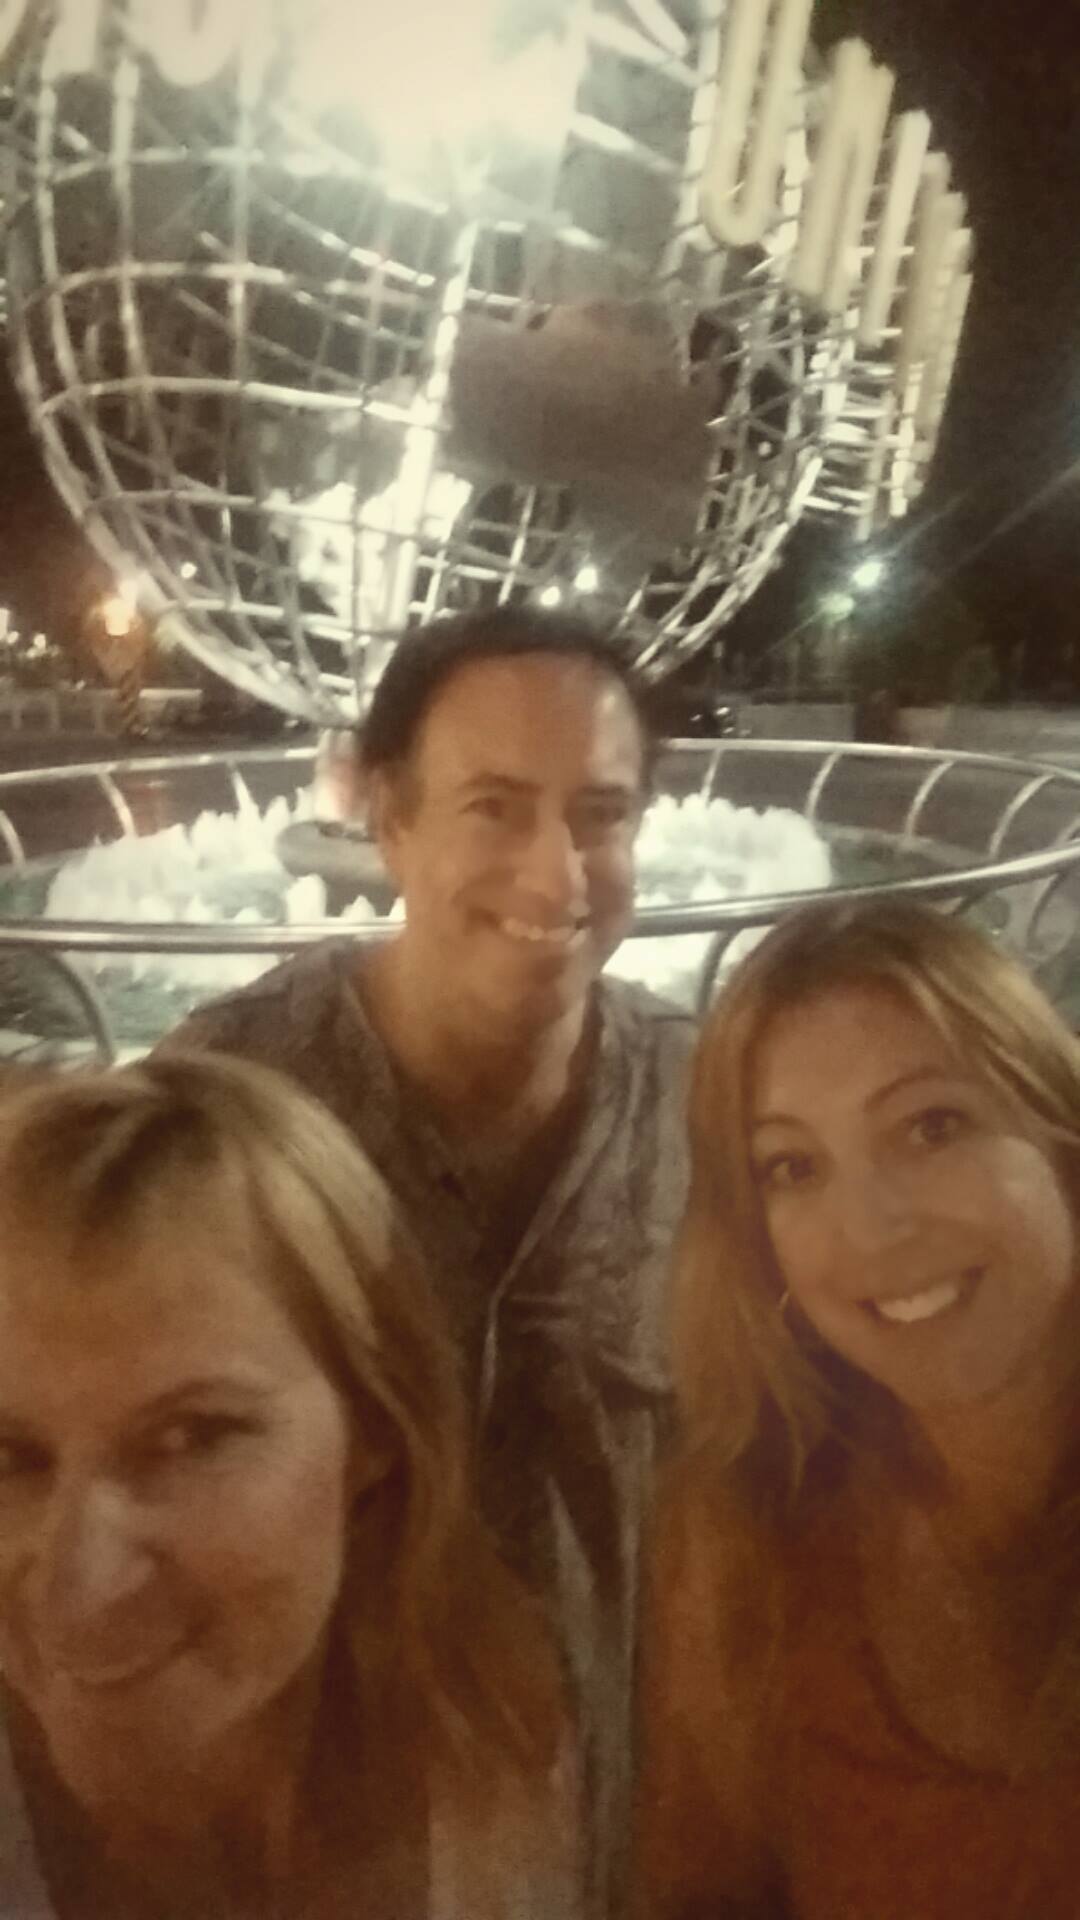 October 6, 2014 at Universal Studios. Richard Rossi is on the lot to hear his son Josh Rossi & his band The Aeons play in final round of Battle of the Bands. (L to R: Richard's wife Sherrie Rossi, Richard, his sister Elizabeth Rossi)